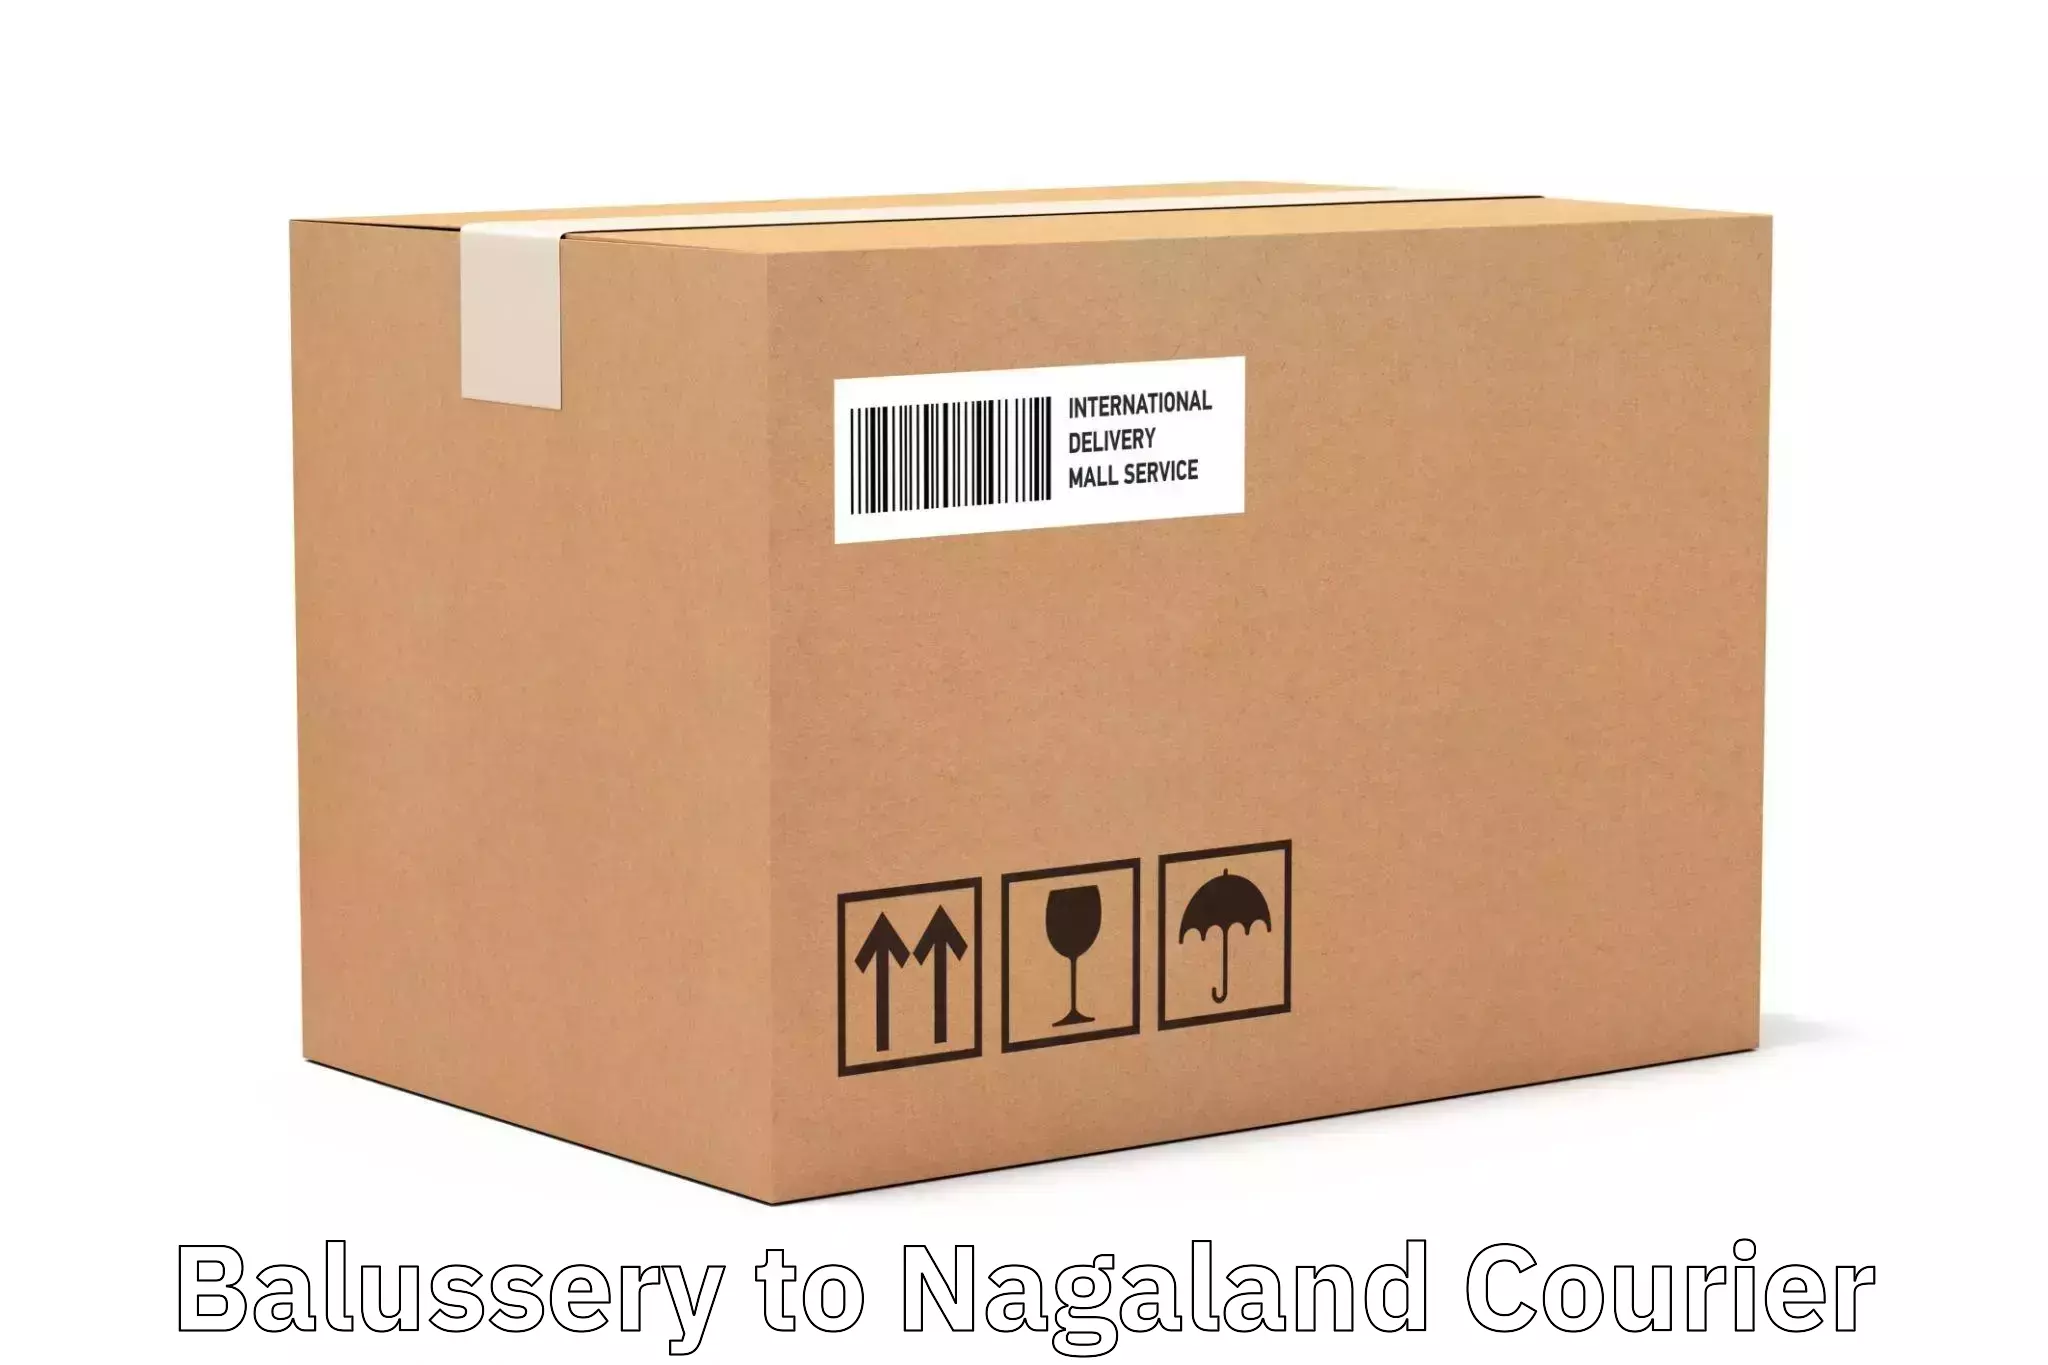 Efficient parcel tracking Balussery to Nagaland